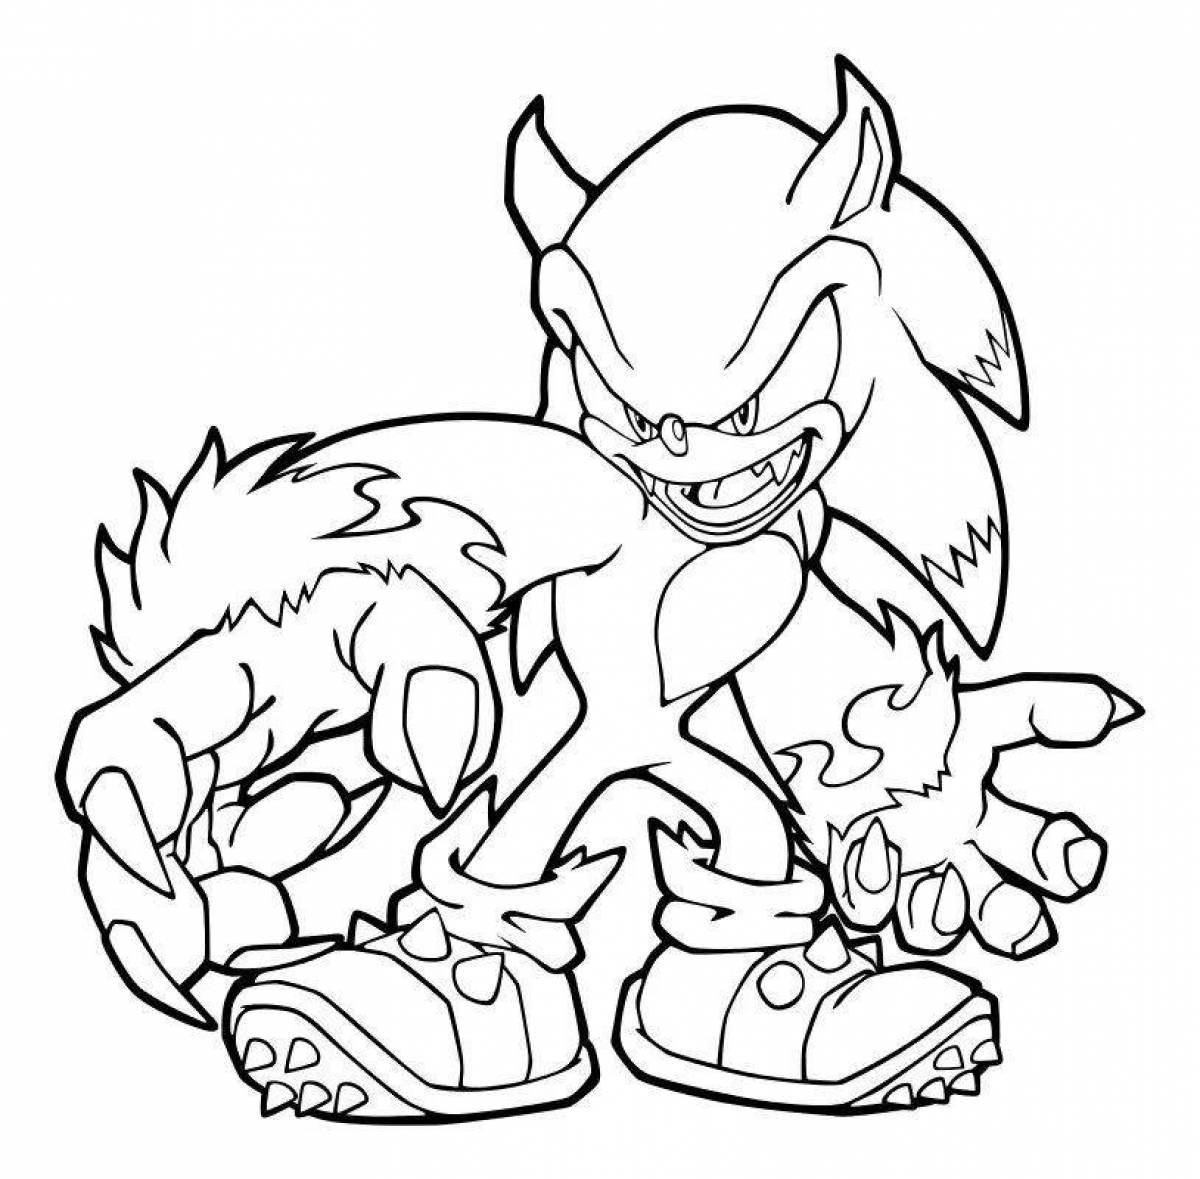 Cooling sonic coloring page